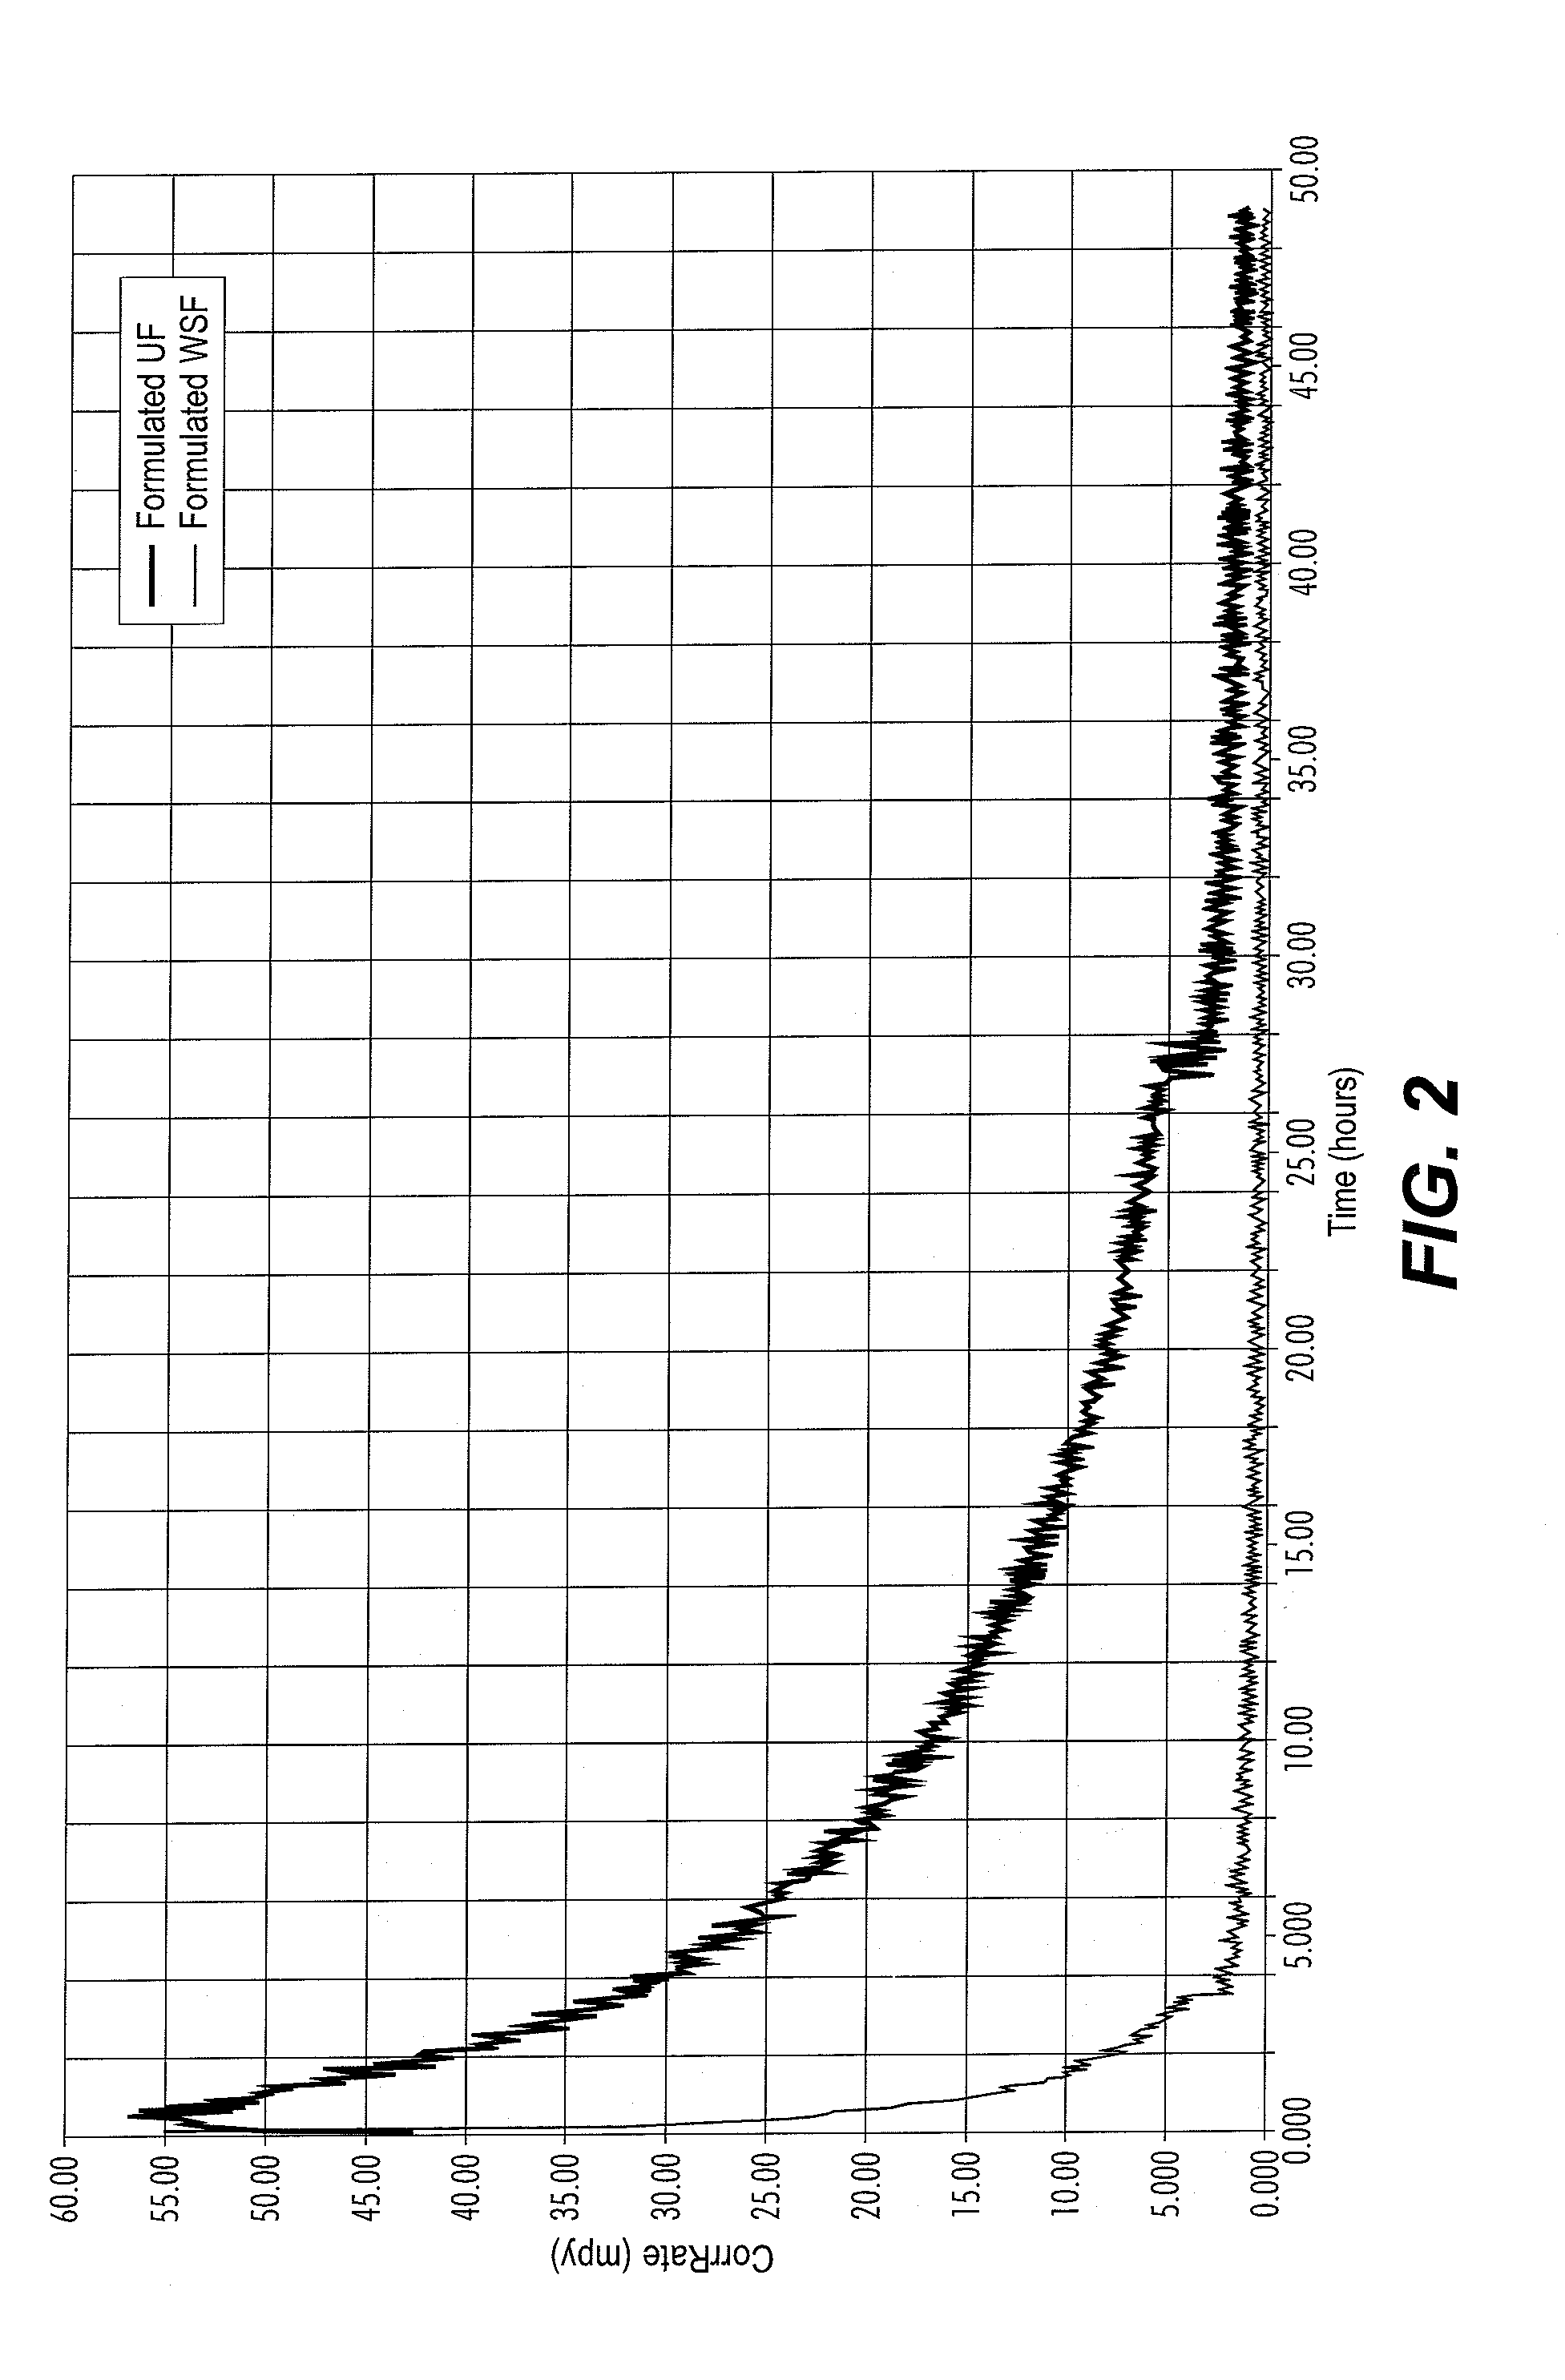 Method of using corrosion inhibitors derived from spent fluids in the treatment of wells